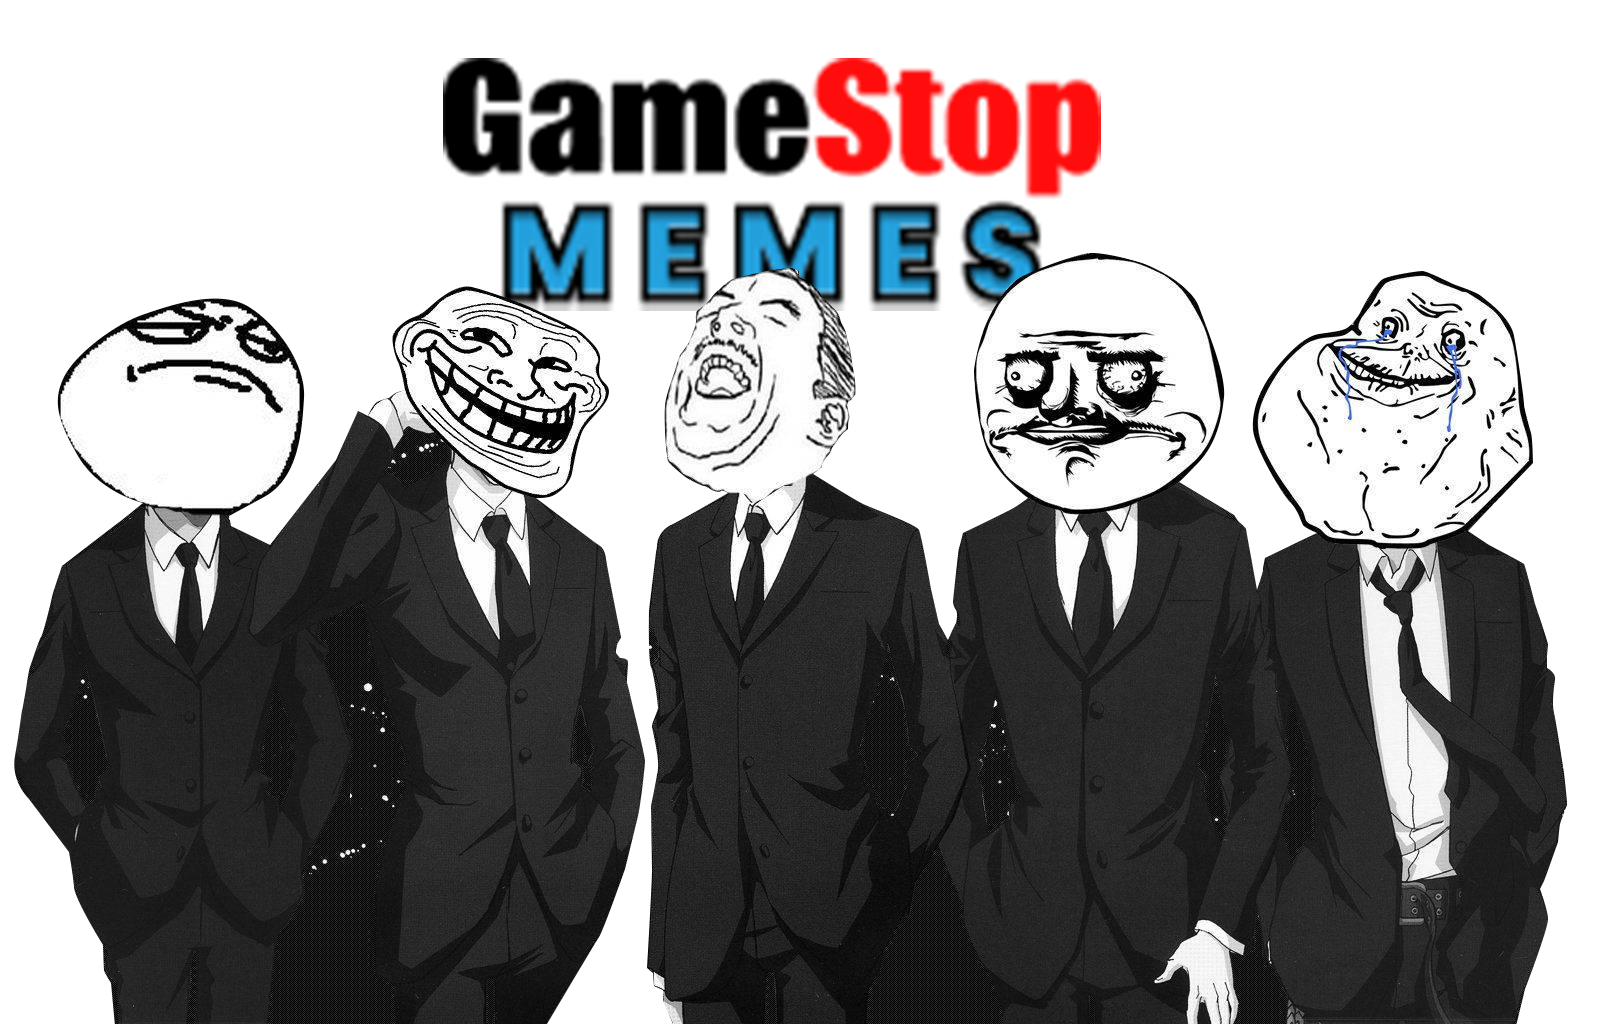 GameStop Memes Banner
Four Memes face guys wearing black three piece suits.